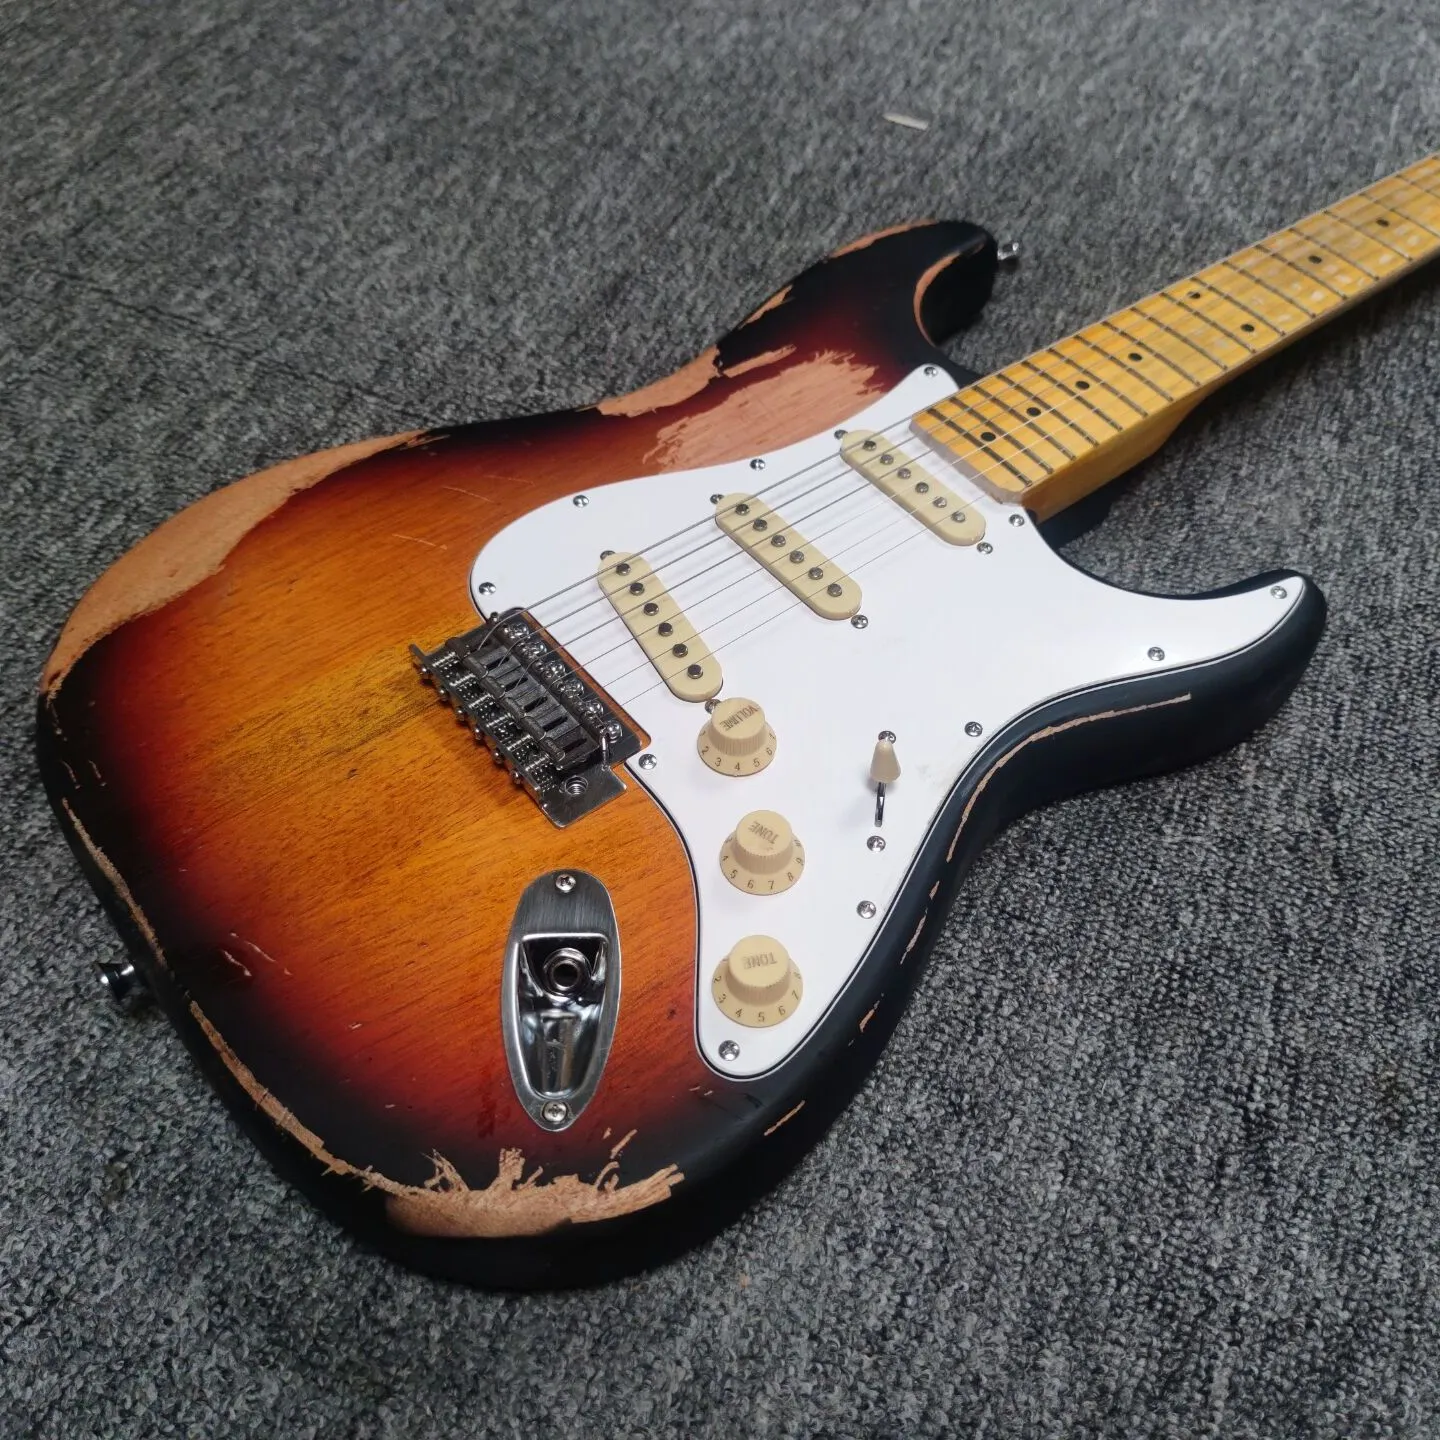 Sunset St usou Relic Electric Guitar Alder Body and Maple Neck Relic Handmade Cultural